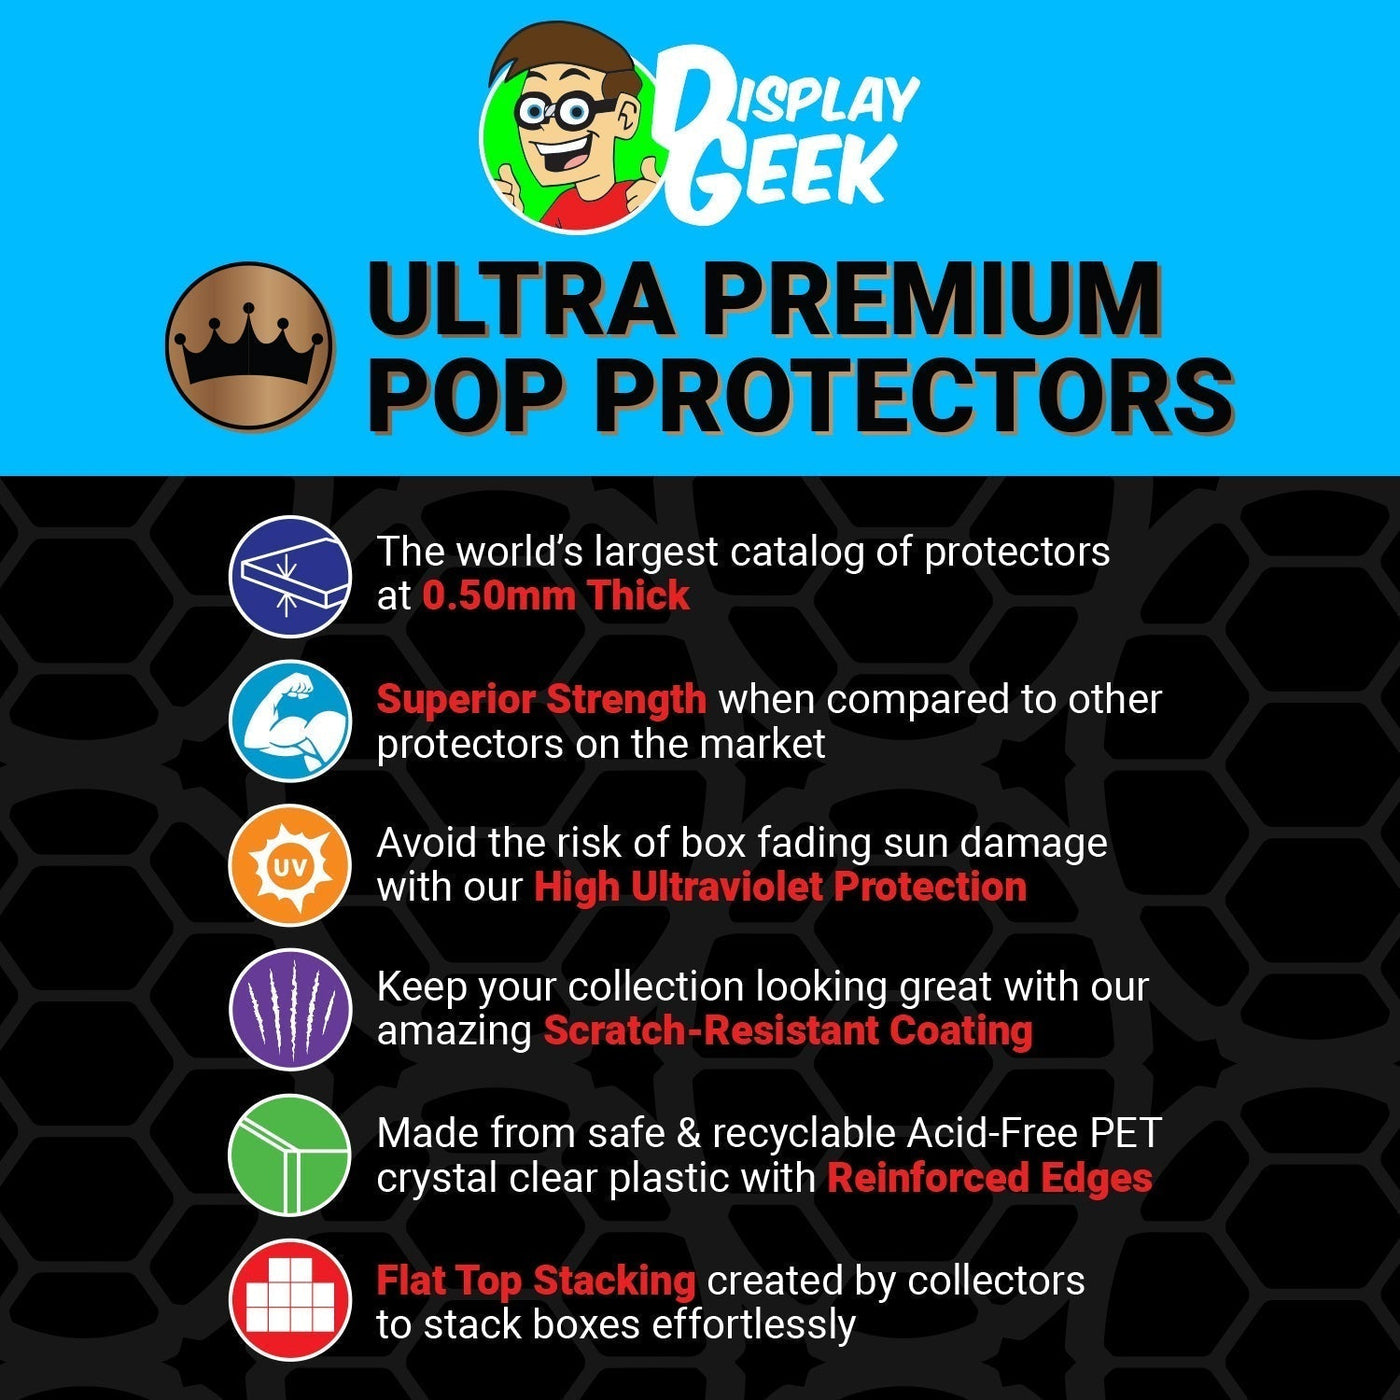 Pop Protector for 6 inch Giant Lady Magenta #99 Super Funko Pop on The Protector Guide App by Display Geek